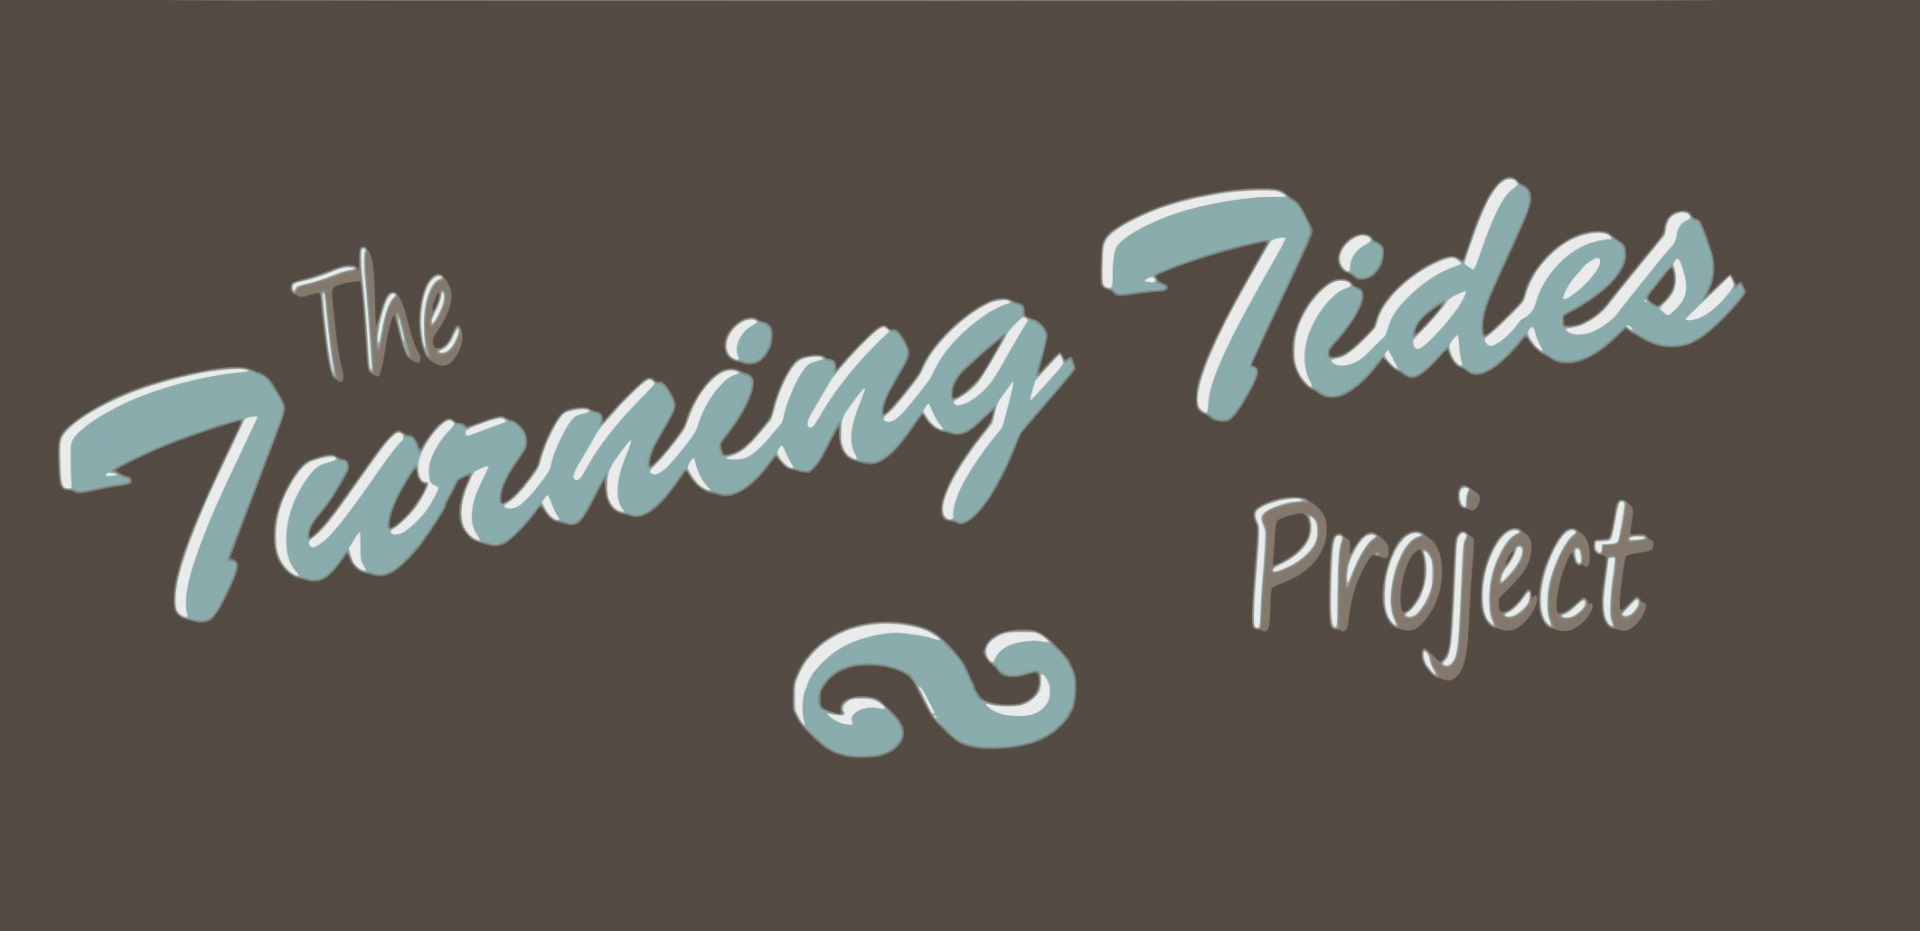 The Turning Tides Project